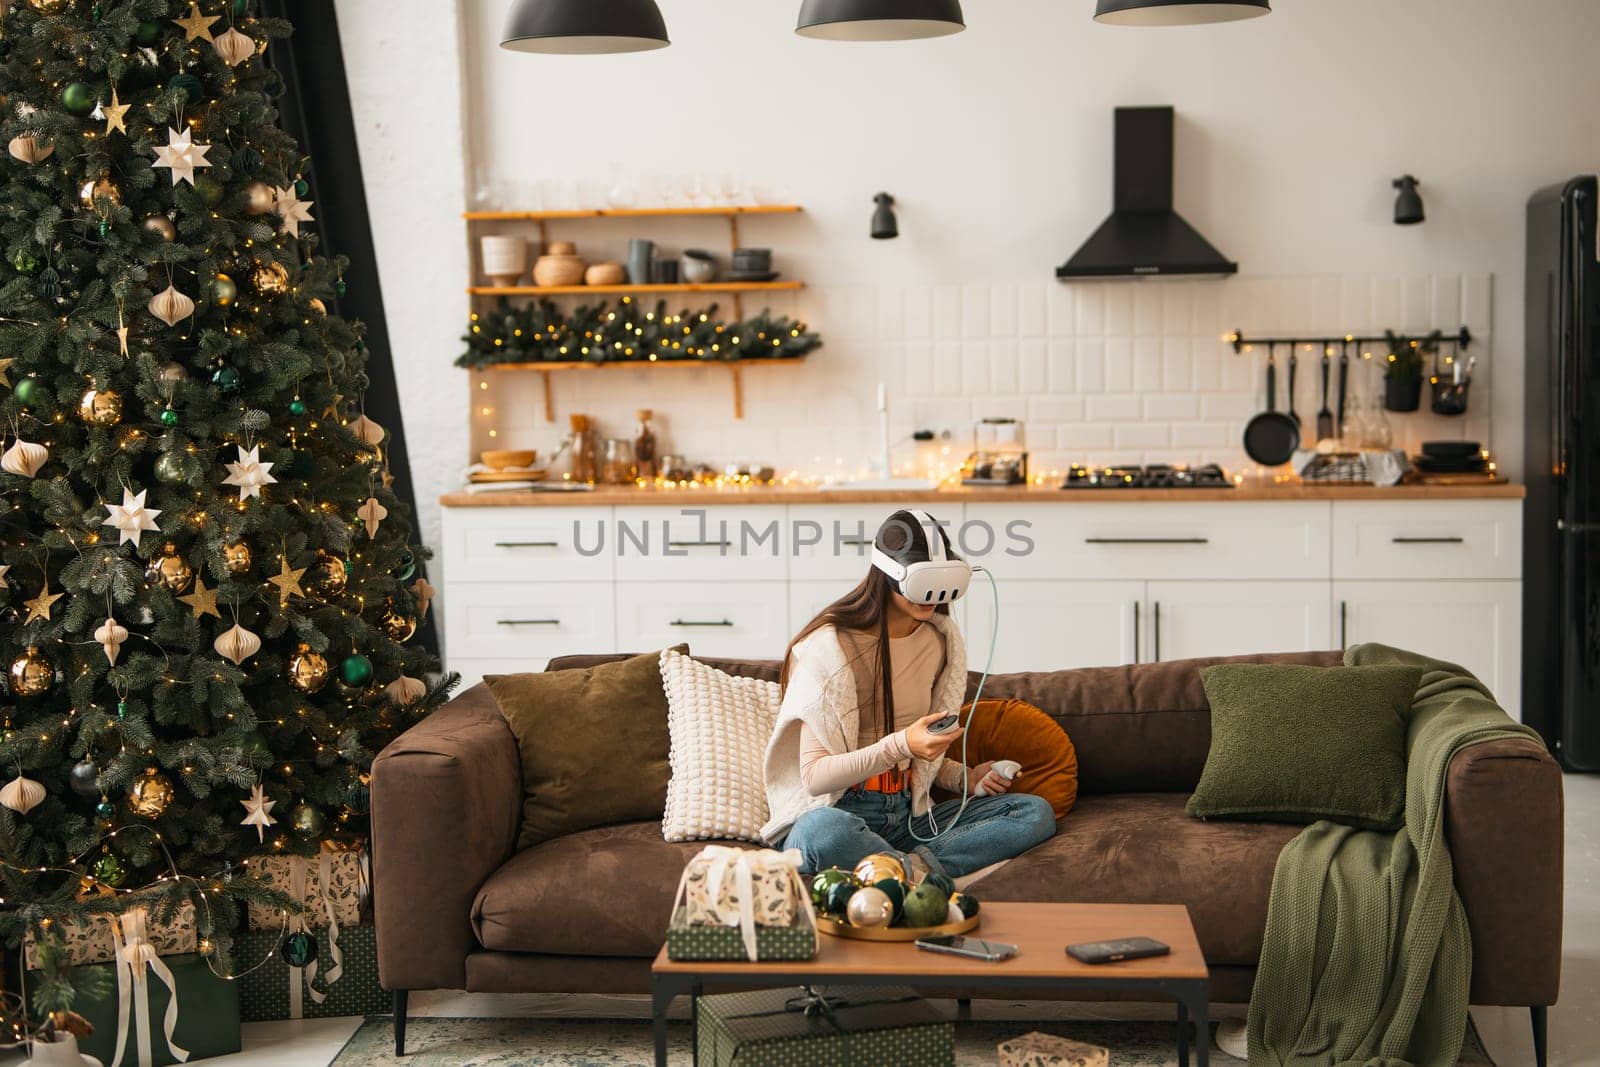 Amidst a warm Christmas ambiance at her place, a stylish young woman is seen in a virtual reality headset. by teksomolika